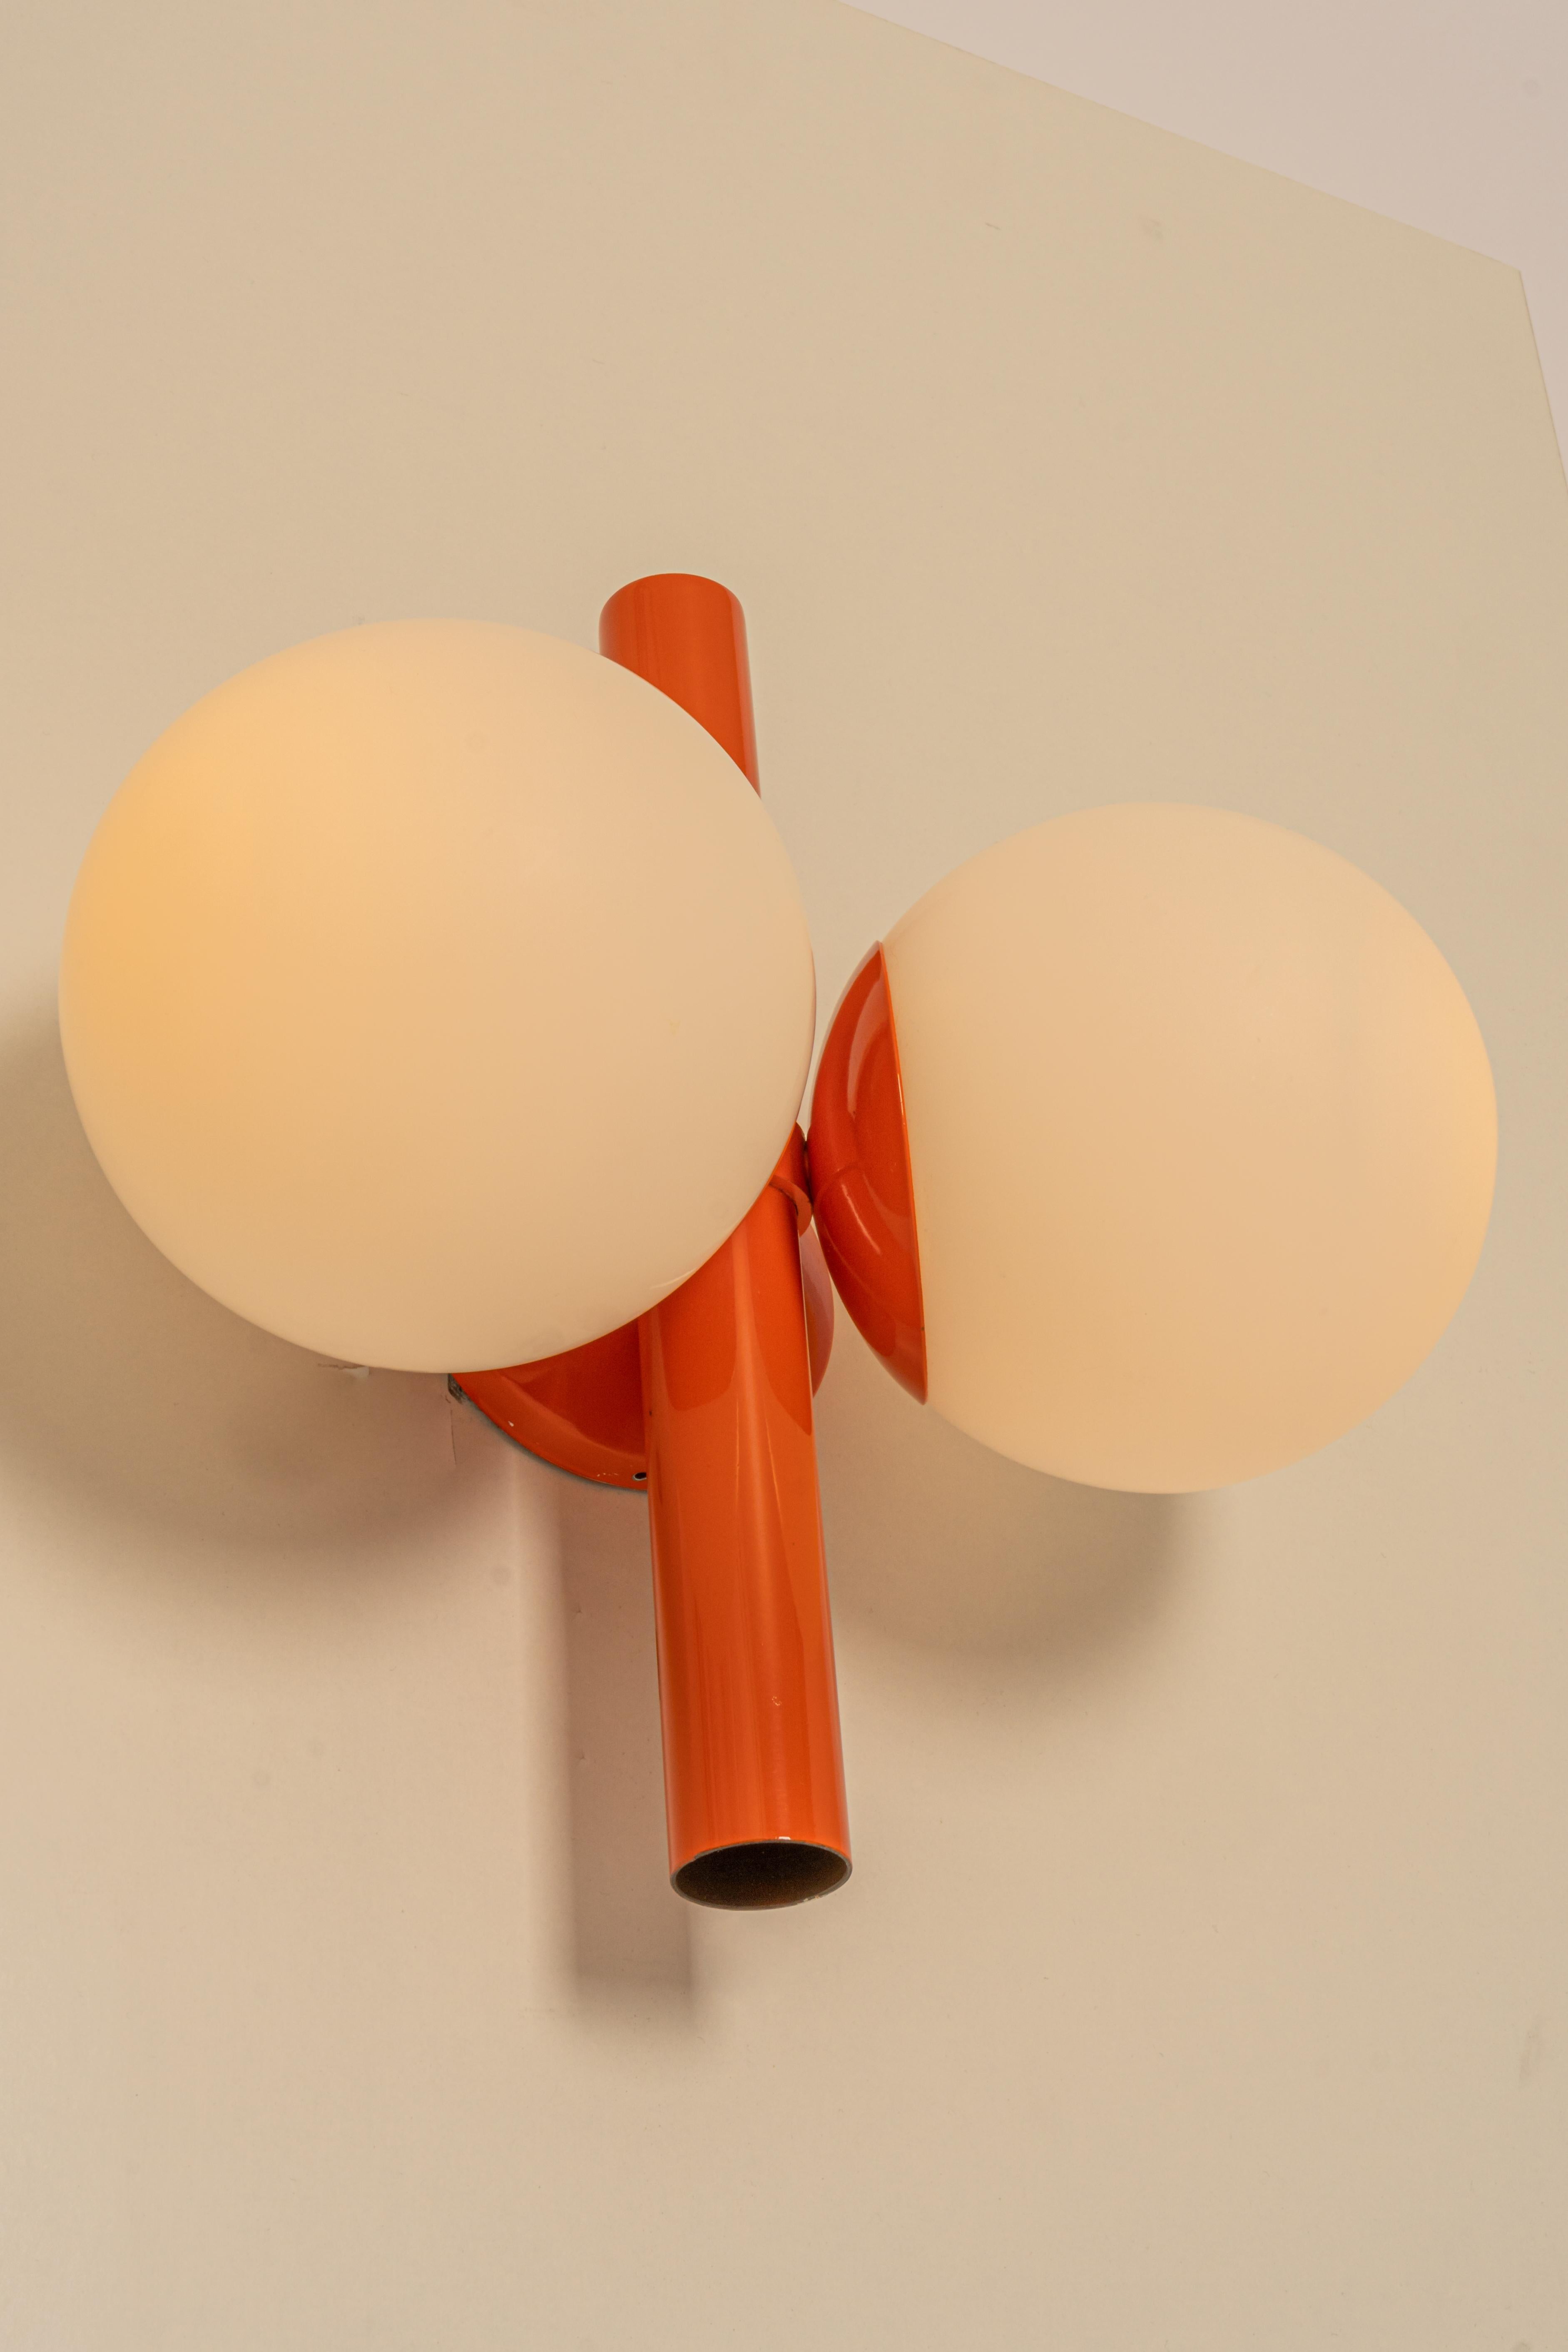 1 of 2 mid-century vintage wall lights in orange color made by Kaiser Leuchten, Germany with 2 opal glass balls.
High quality and in very good condition. Cleaned, well-wired, and ready to use. 

The fixture requires 2 x E14 small bulbs with 40W